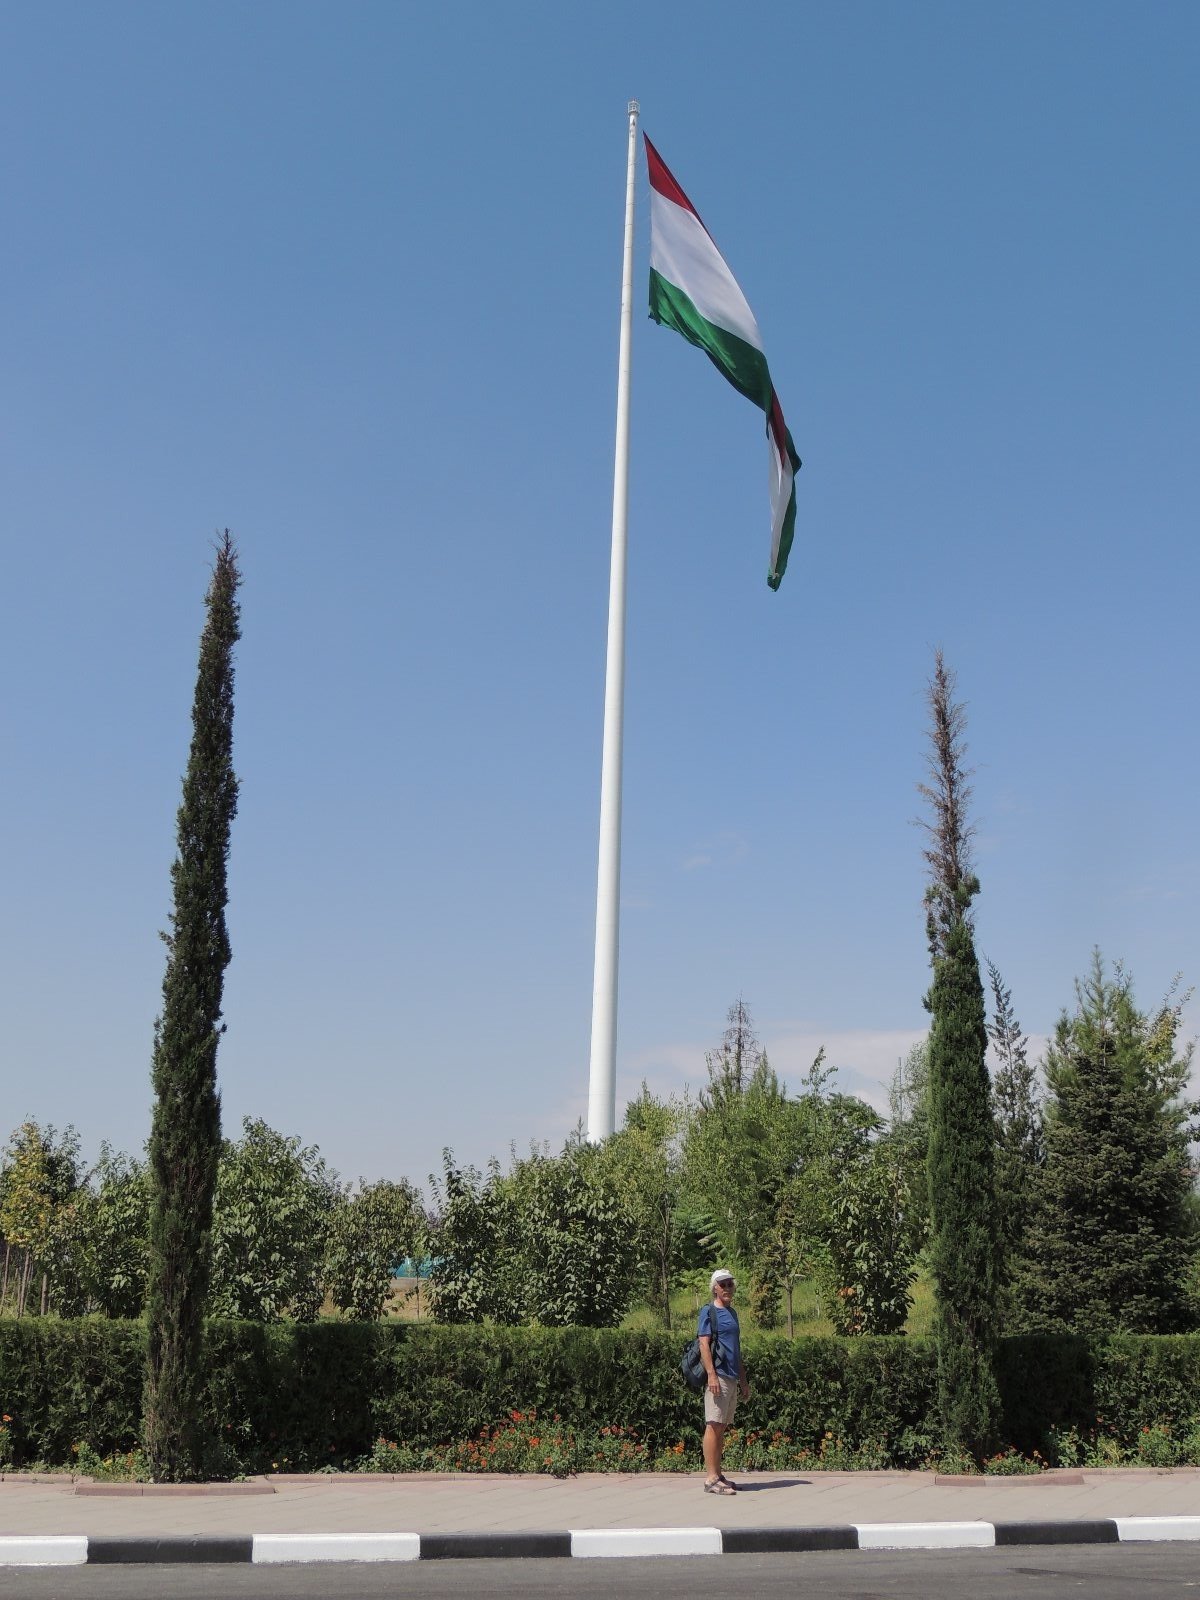 Tallest Flagpole In The World Photo